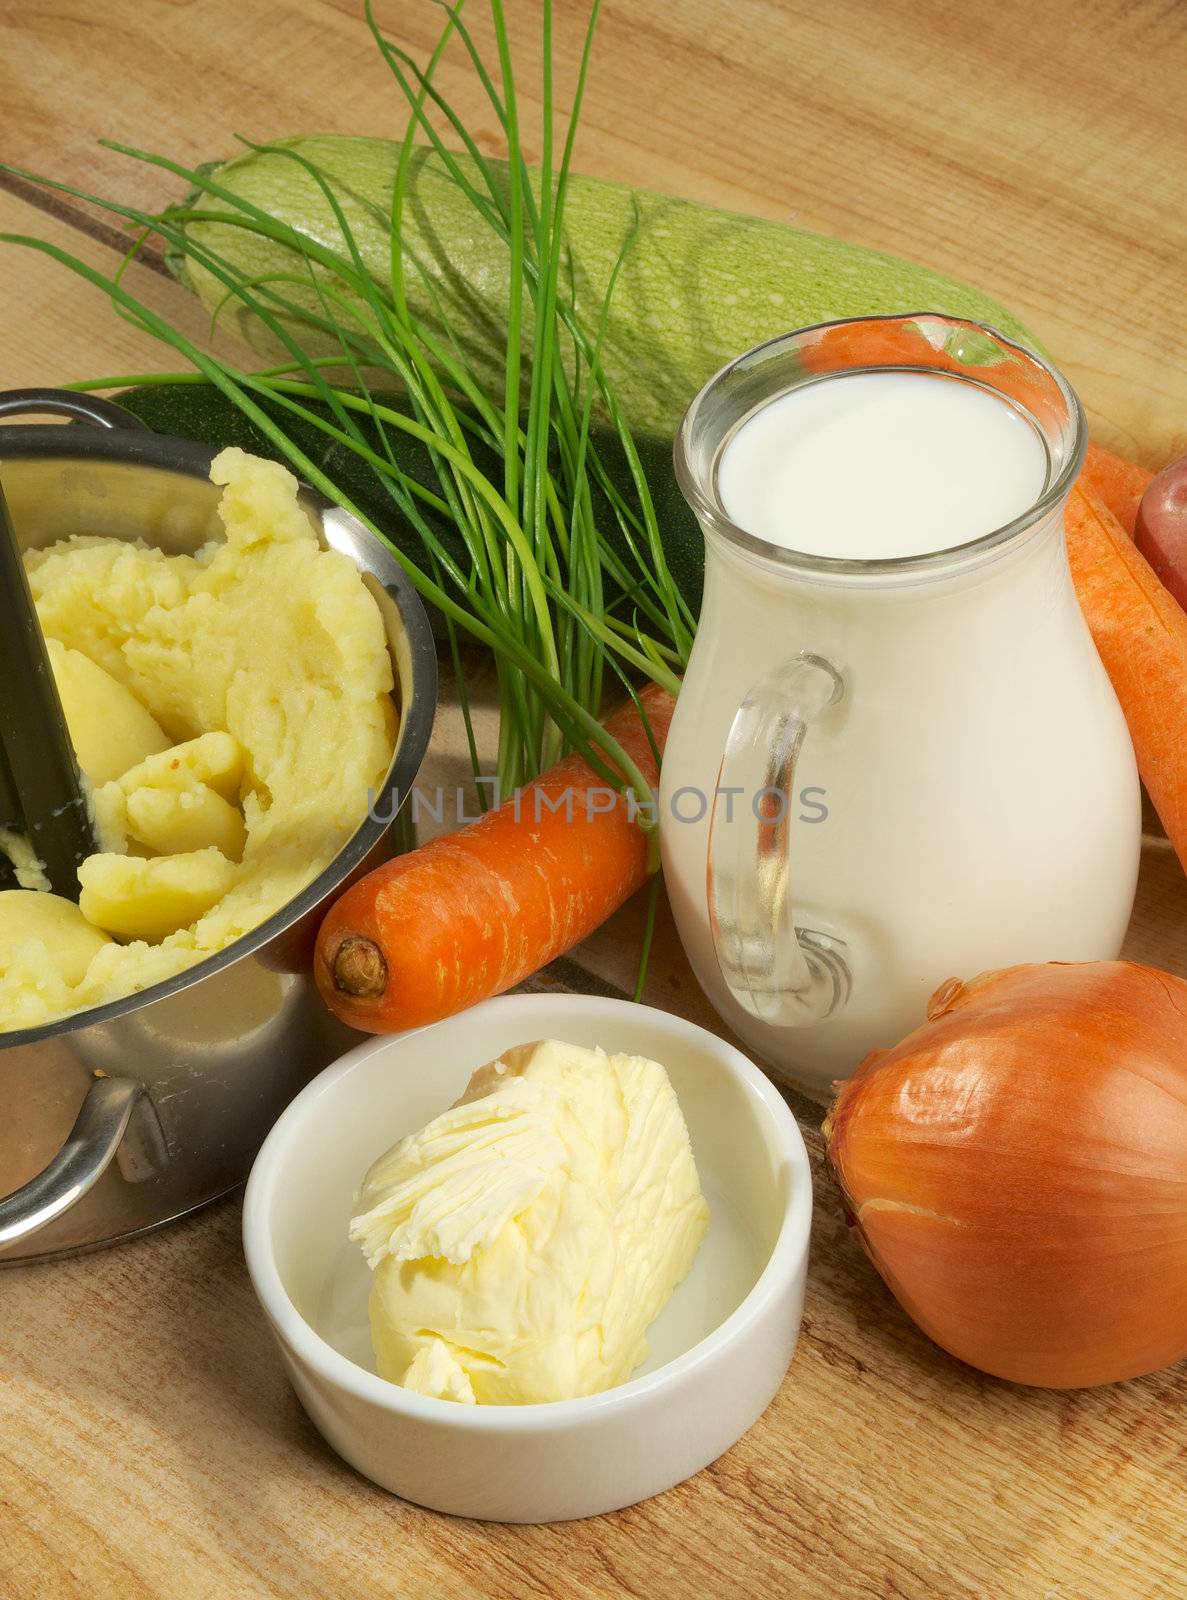 Preparing Vegetables Puree. Mashed Potato, Jar of Milk, Butter, Onion, Carrot, Greens and Zucchini closeup on Wooden background